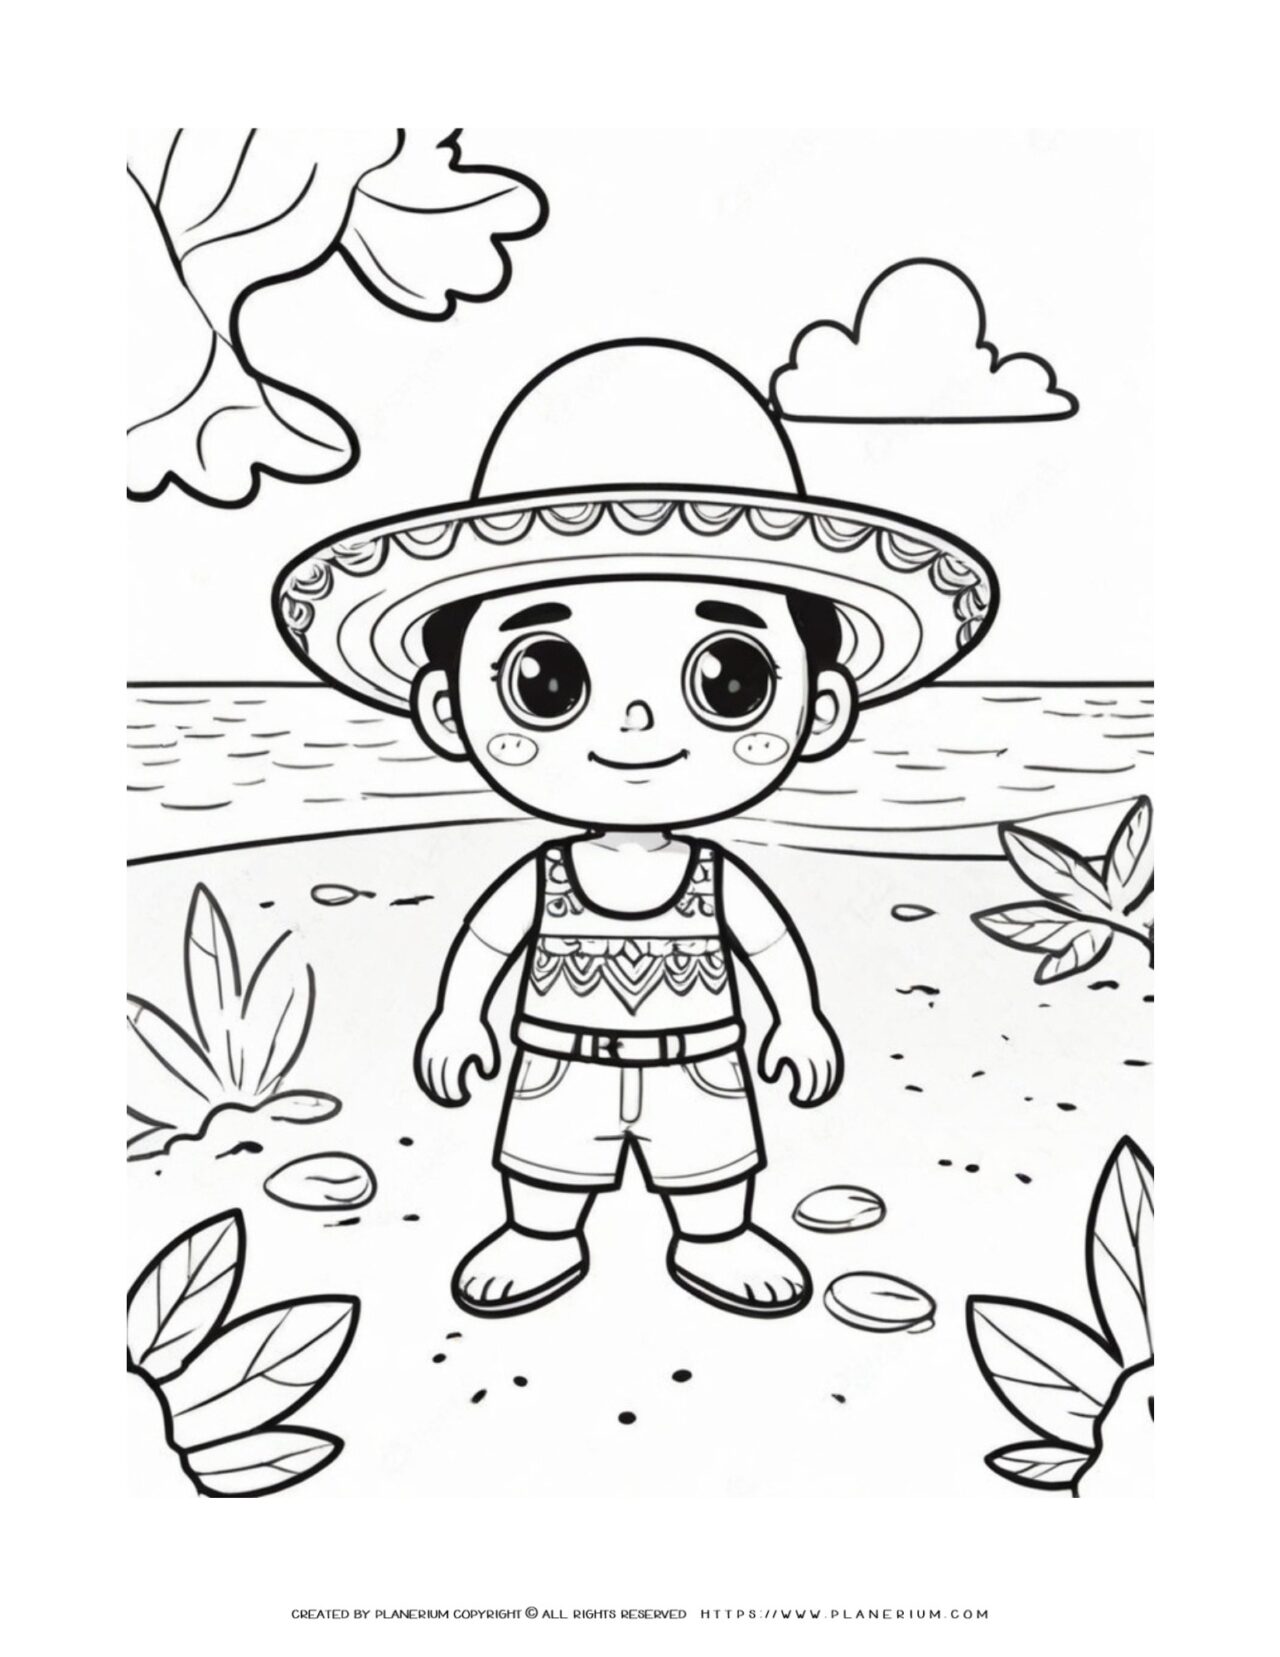 mexican-little-happy-boy-with-summer-clothes-sombrero-hat-standing-on-the-beach-coloring-page-for-kids